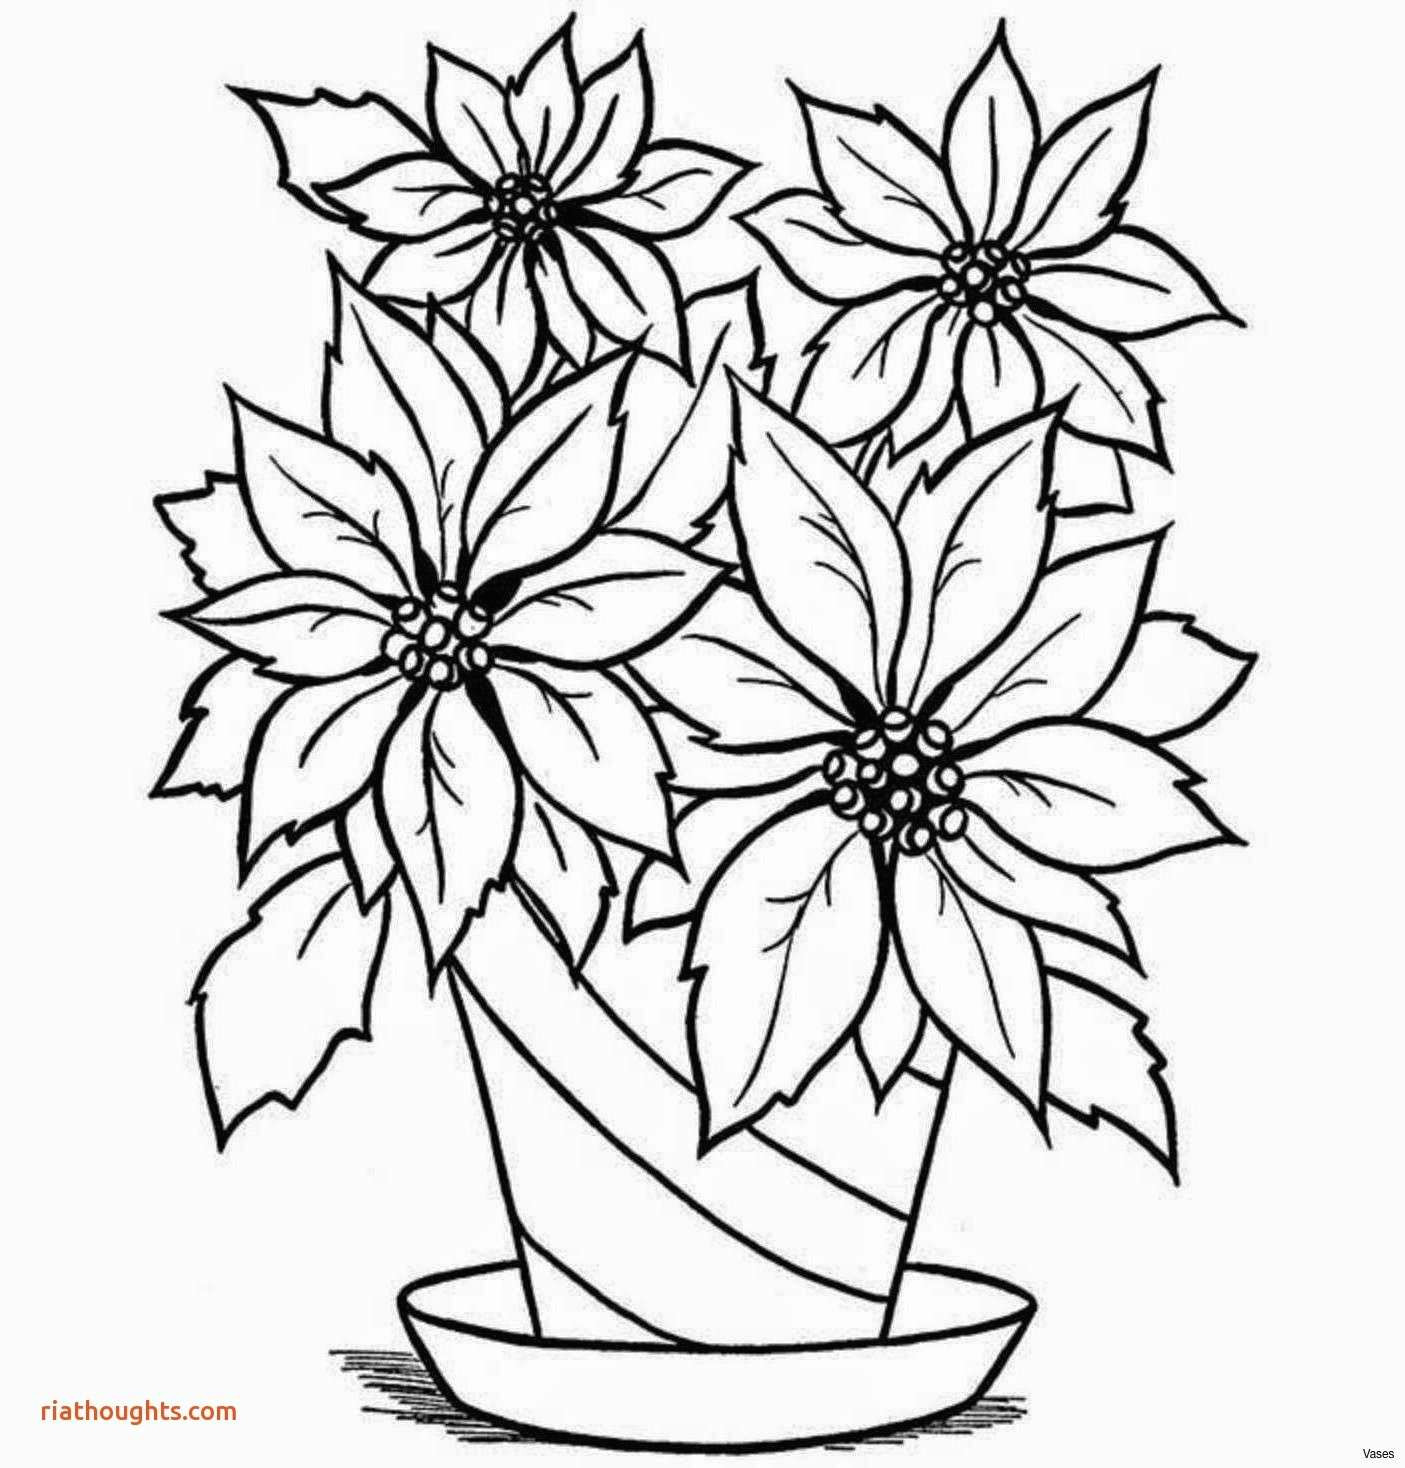 Drawing Flowers Pic 25 Fancy Draw A Flower Helpsite Us